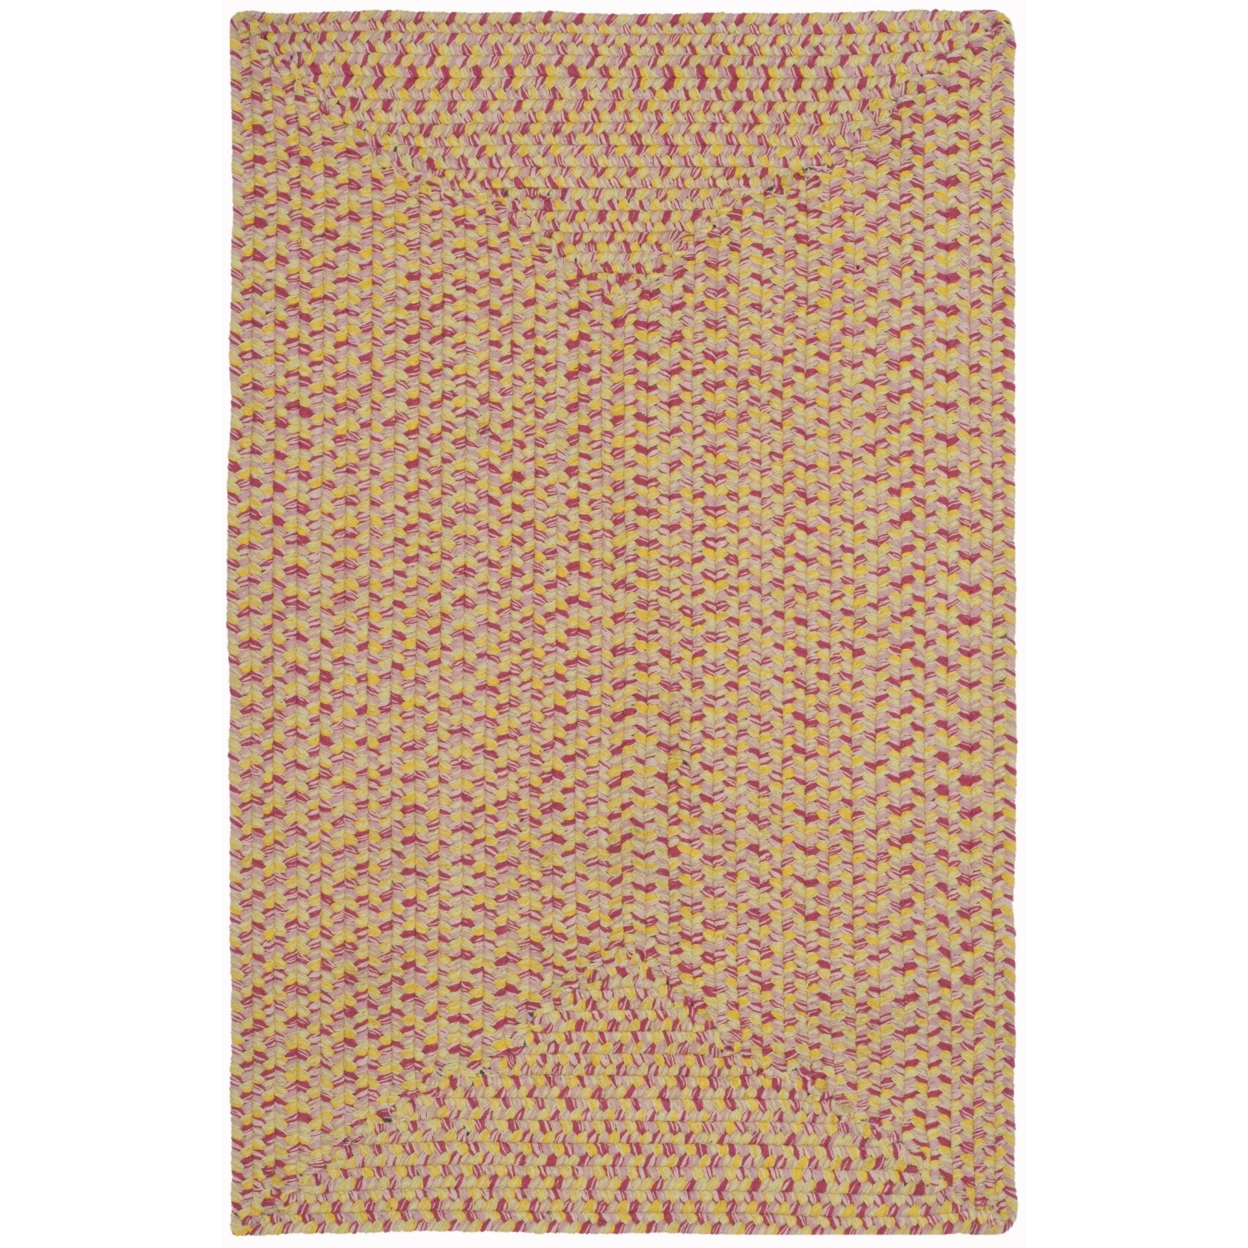 SAFAVIEH Braided Collection BRD164A Handwoven Multi Rug - 2' 6 X 4'